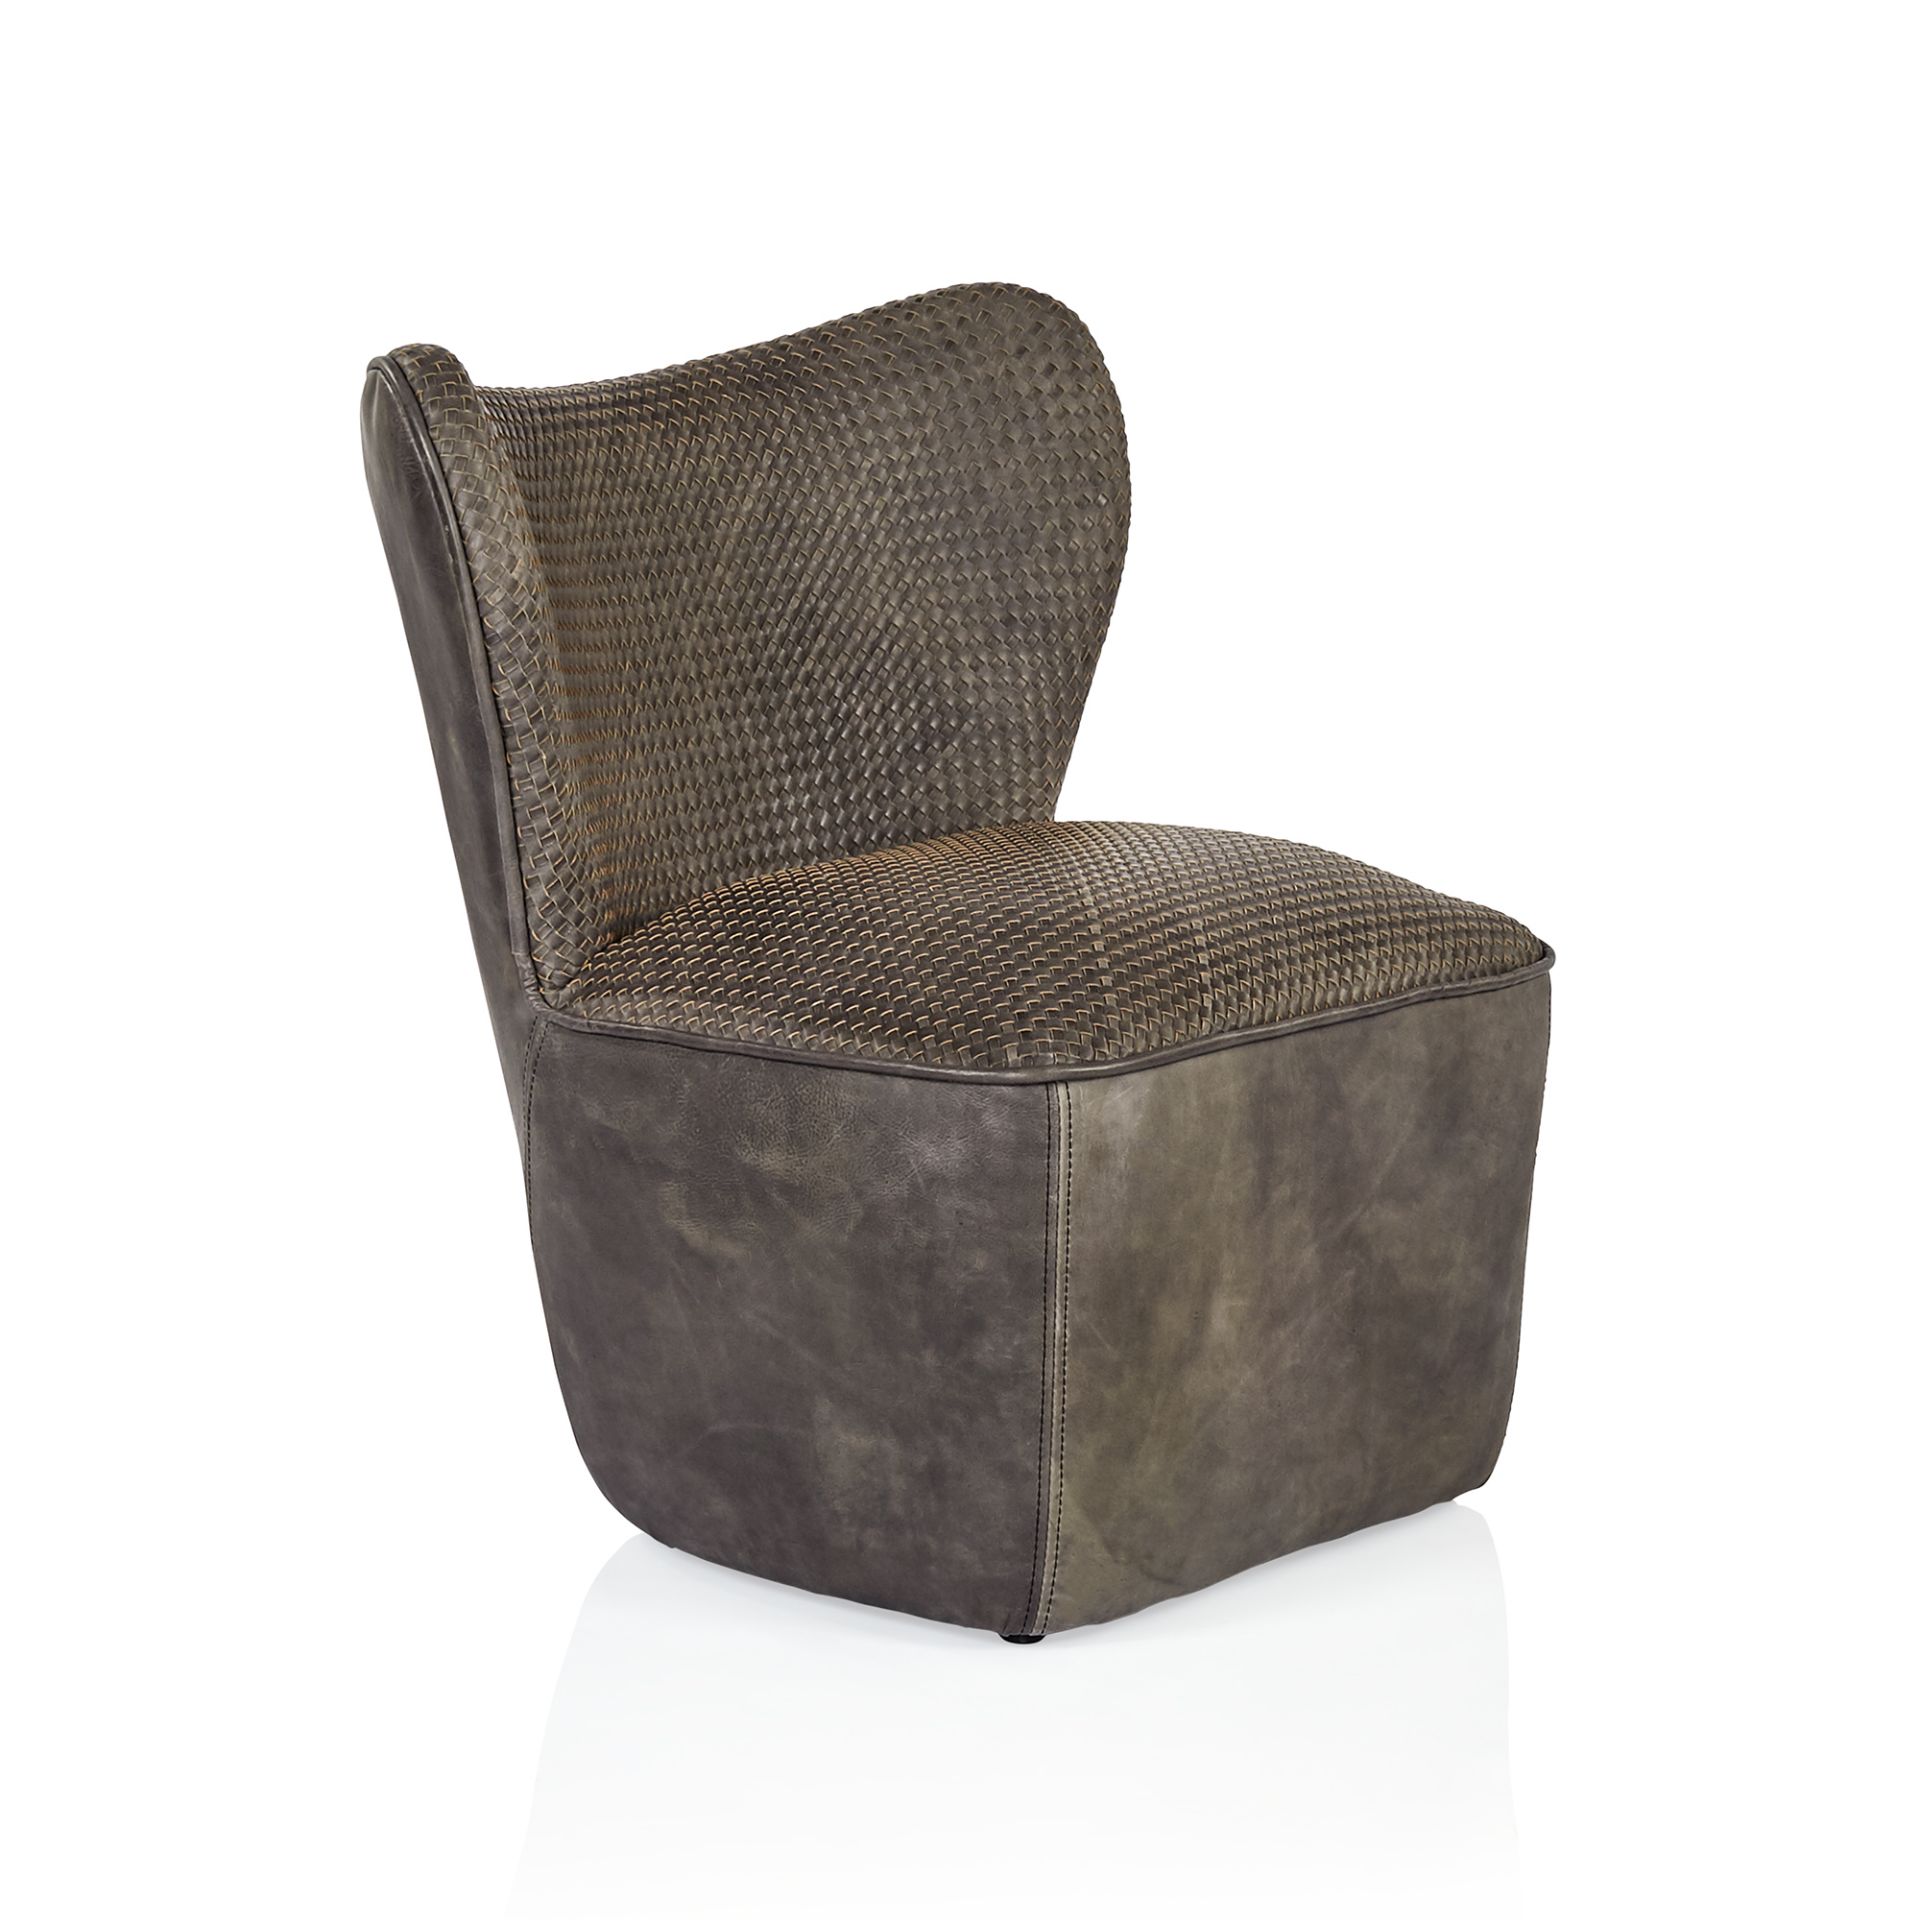 Weave Chair Destroyed Black Leather This Sumptuous Chair Invites You To Reach Out And Touch It, With - Image 2 of 3